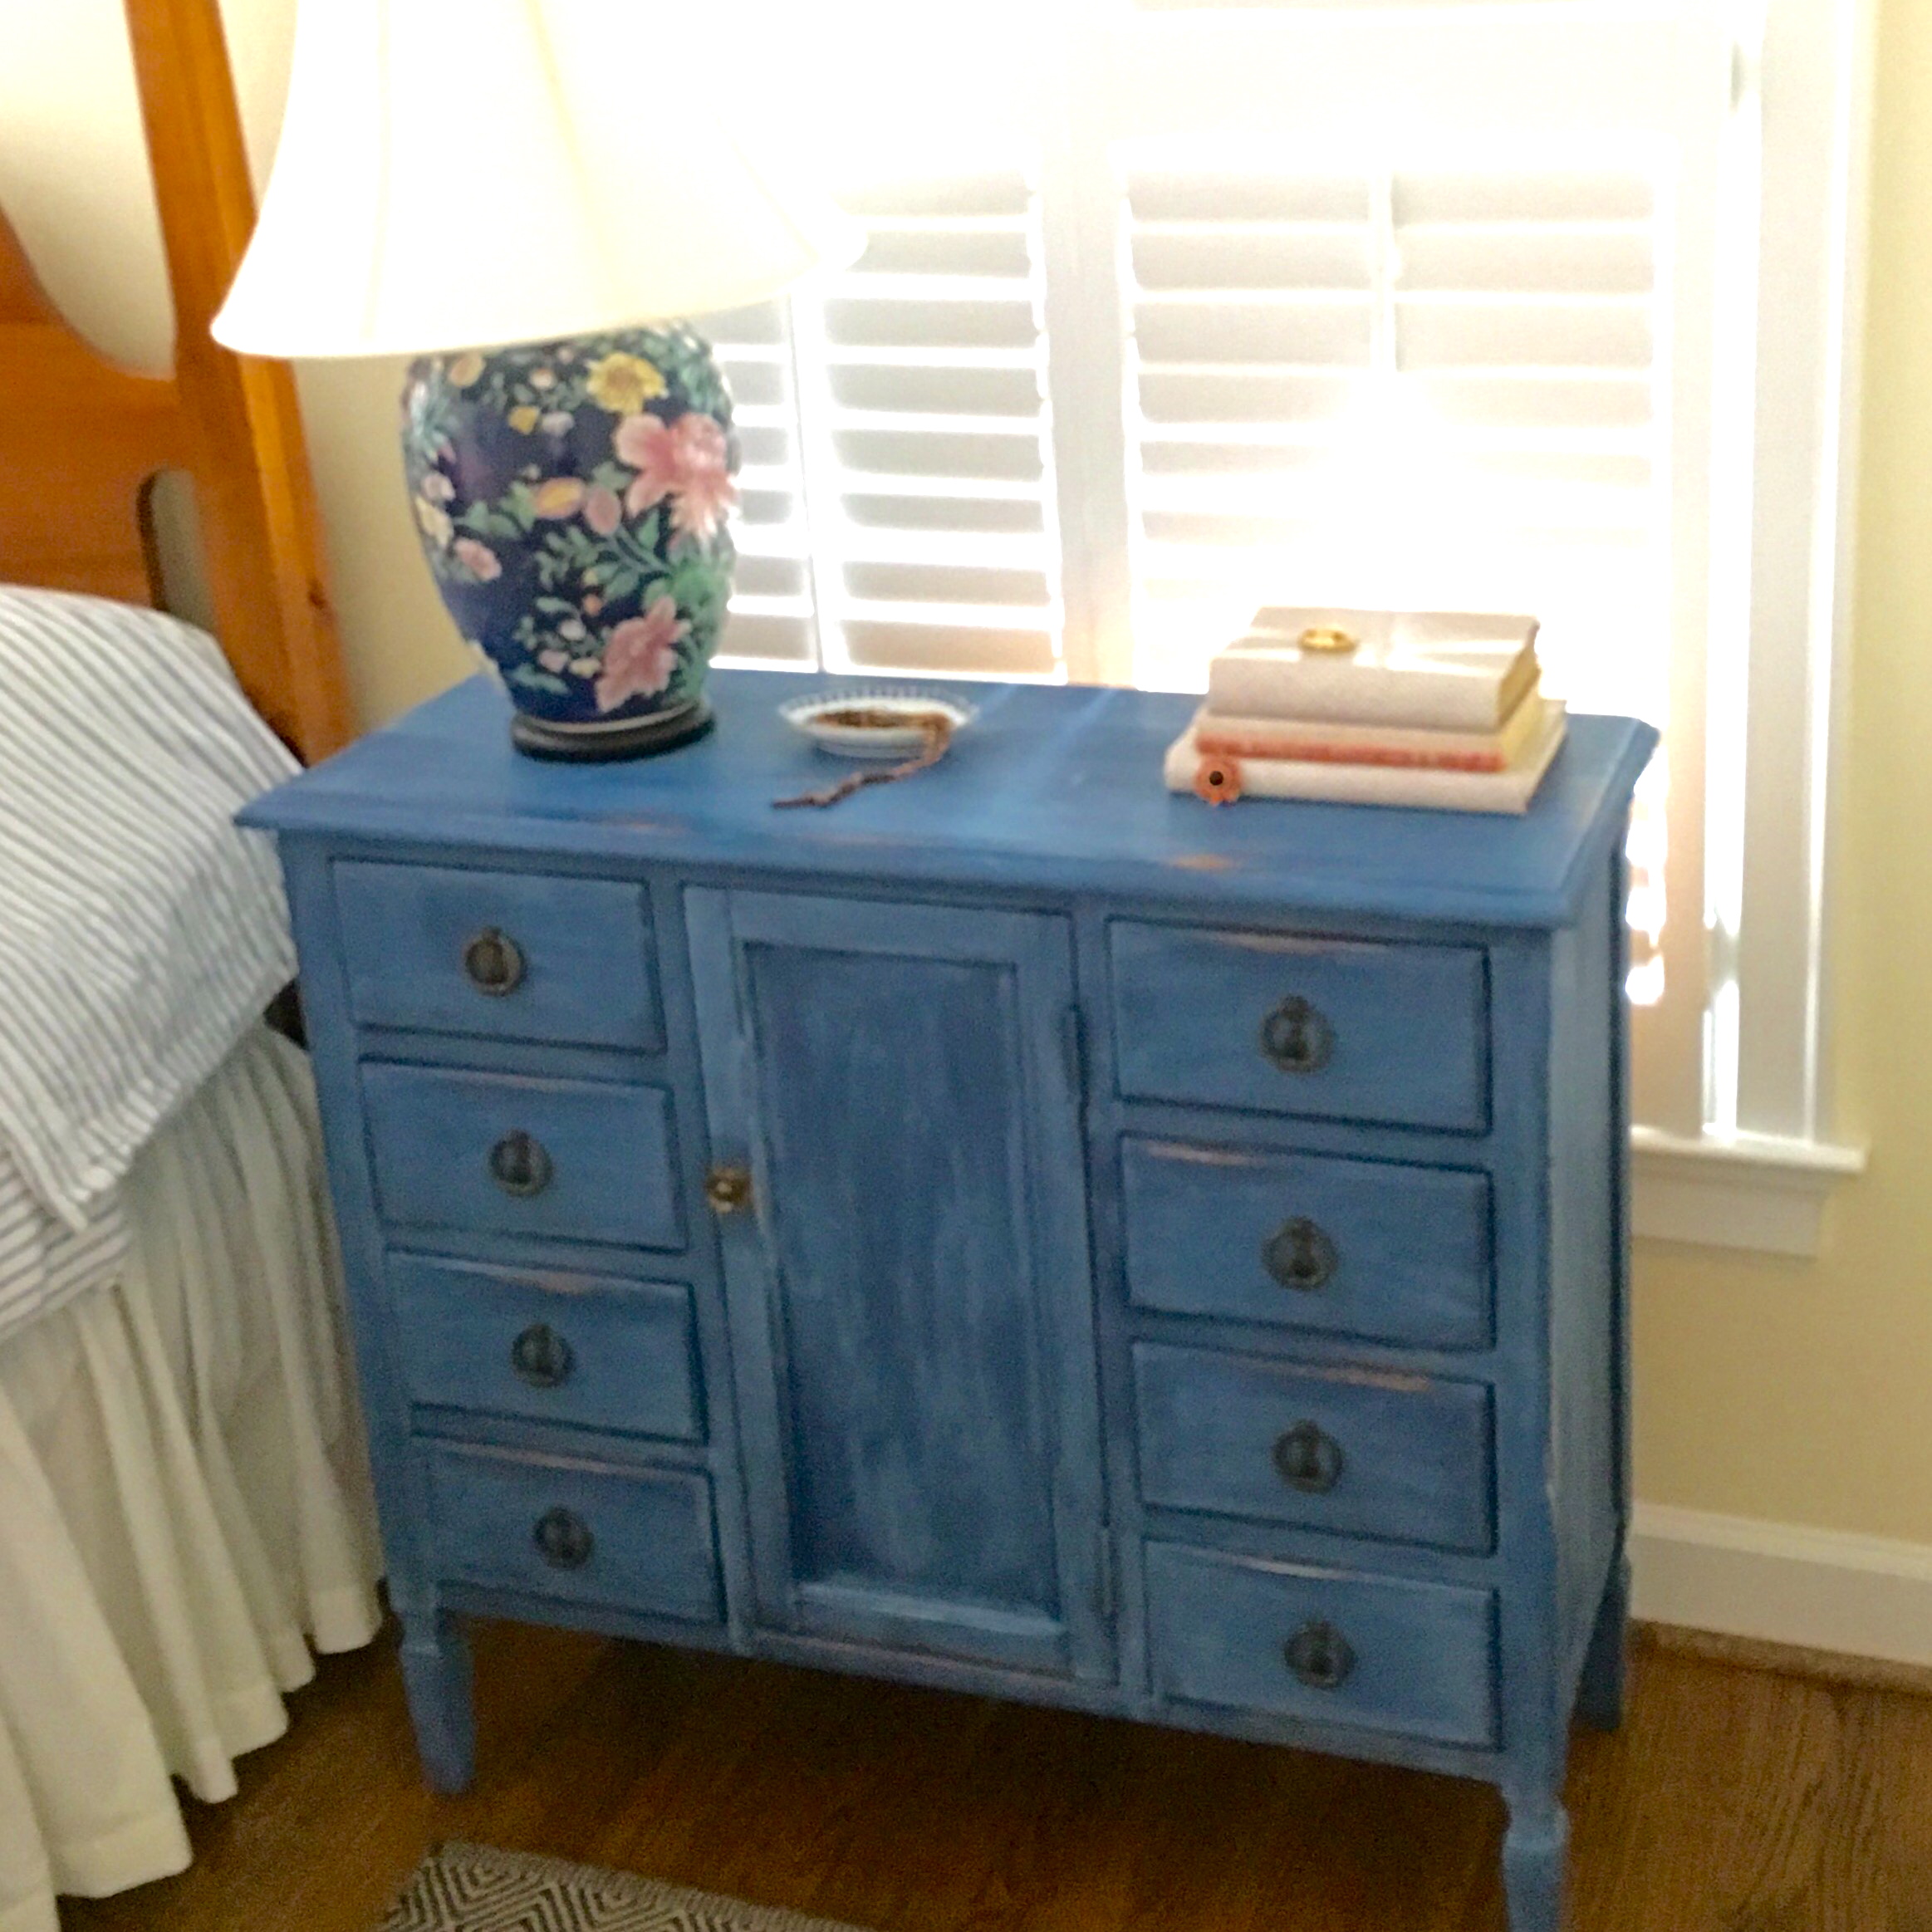 IMG 4144 - A Dresser for the Guest Room